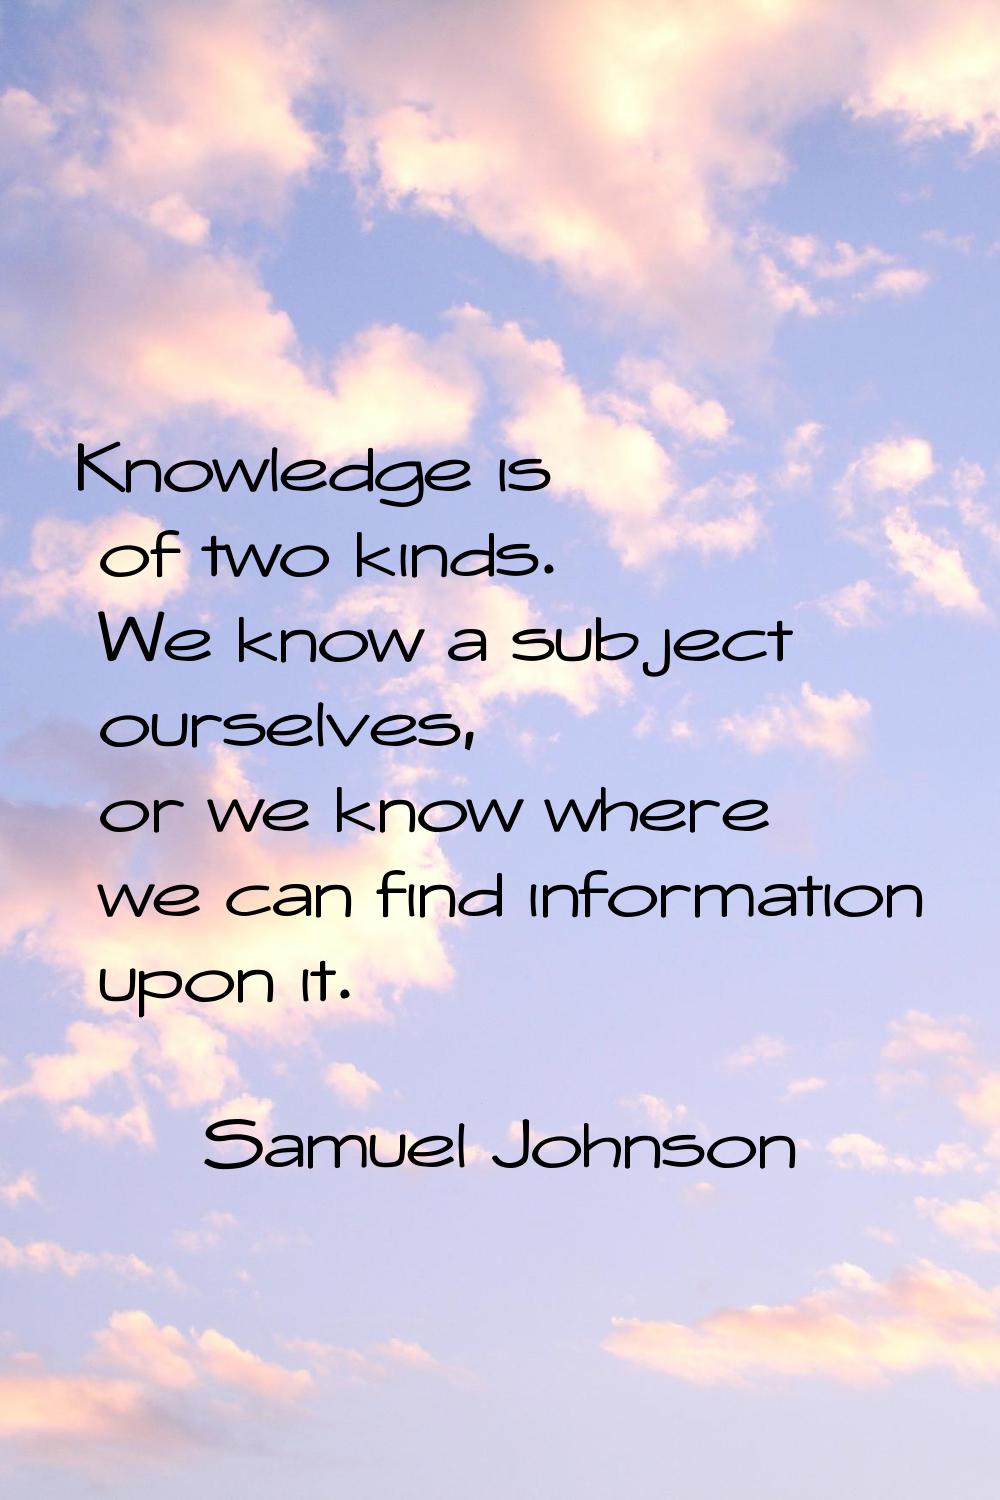 Knowledge is of two kinds. We know a subject ourselves, or we know where we can find information up